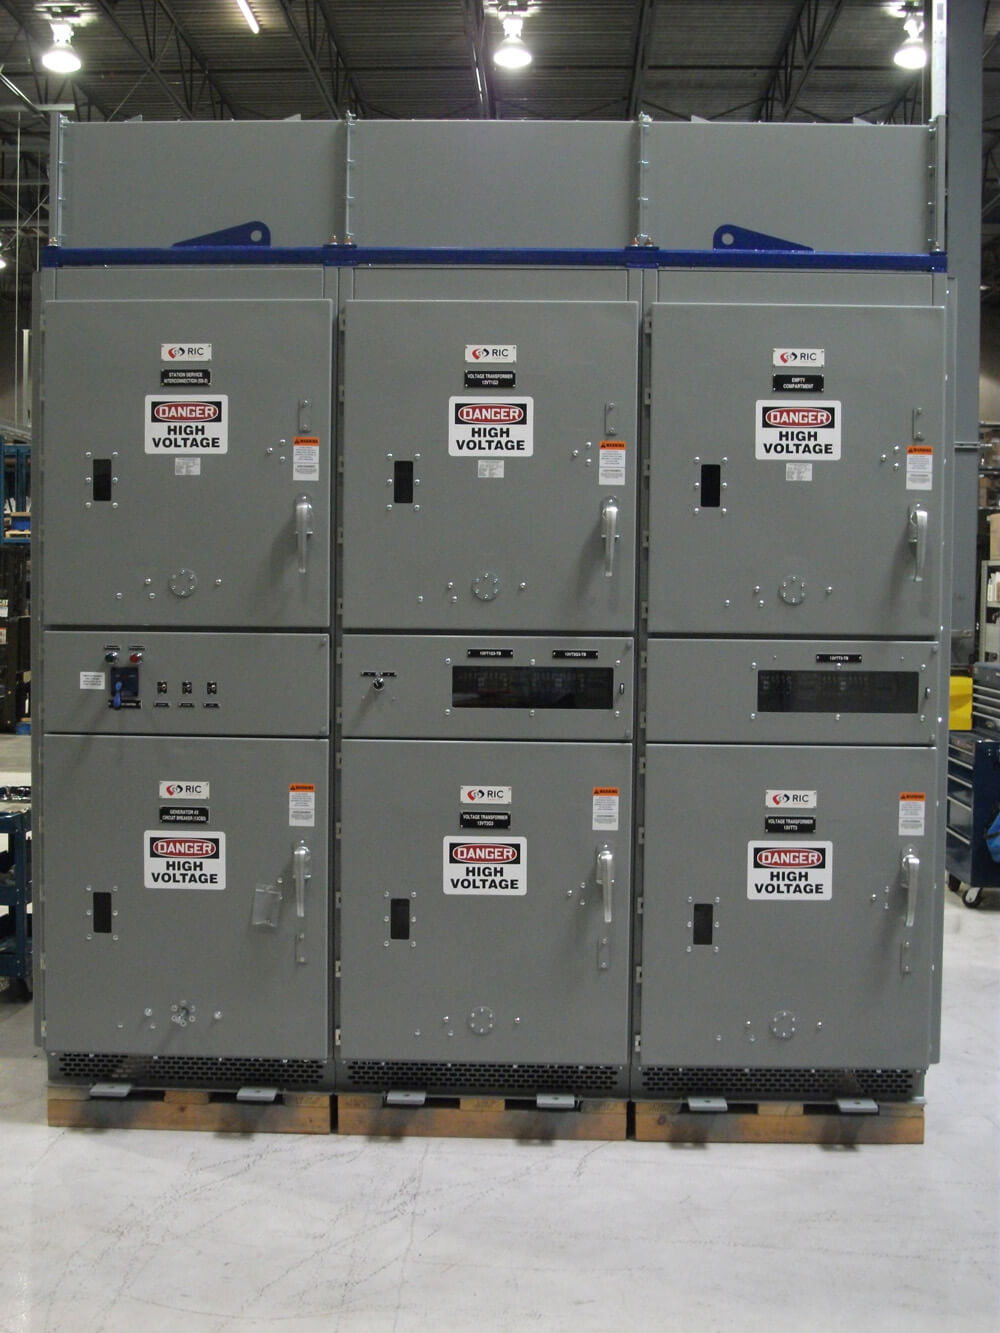 15kV Arc Resistant Metal Clad Switchgear front view - BC Hydro Ruskin Dam